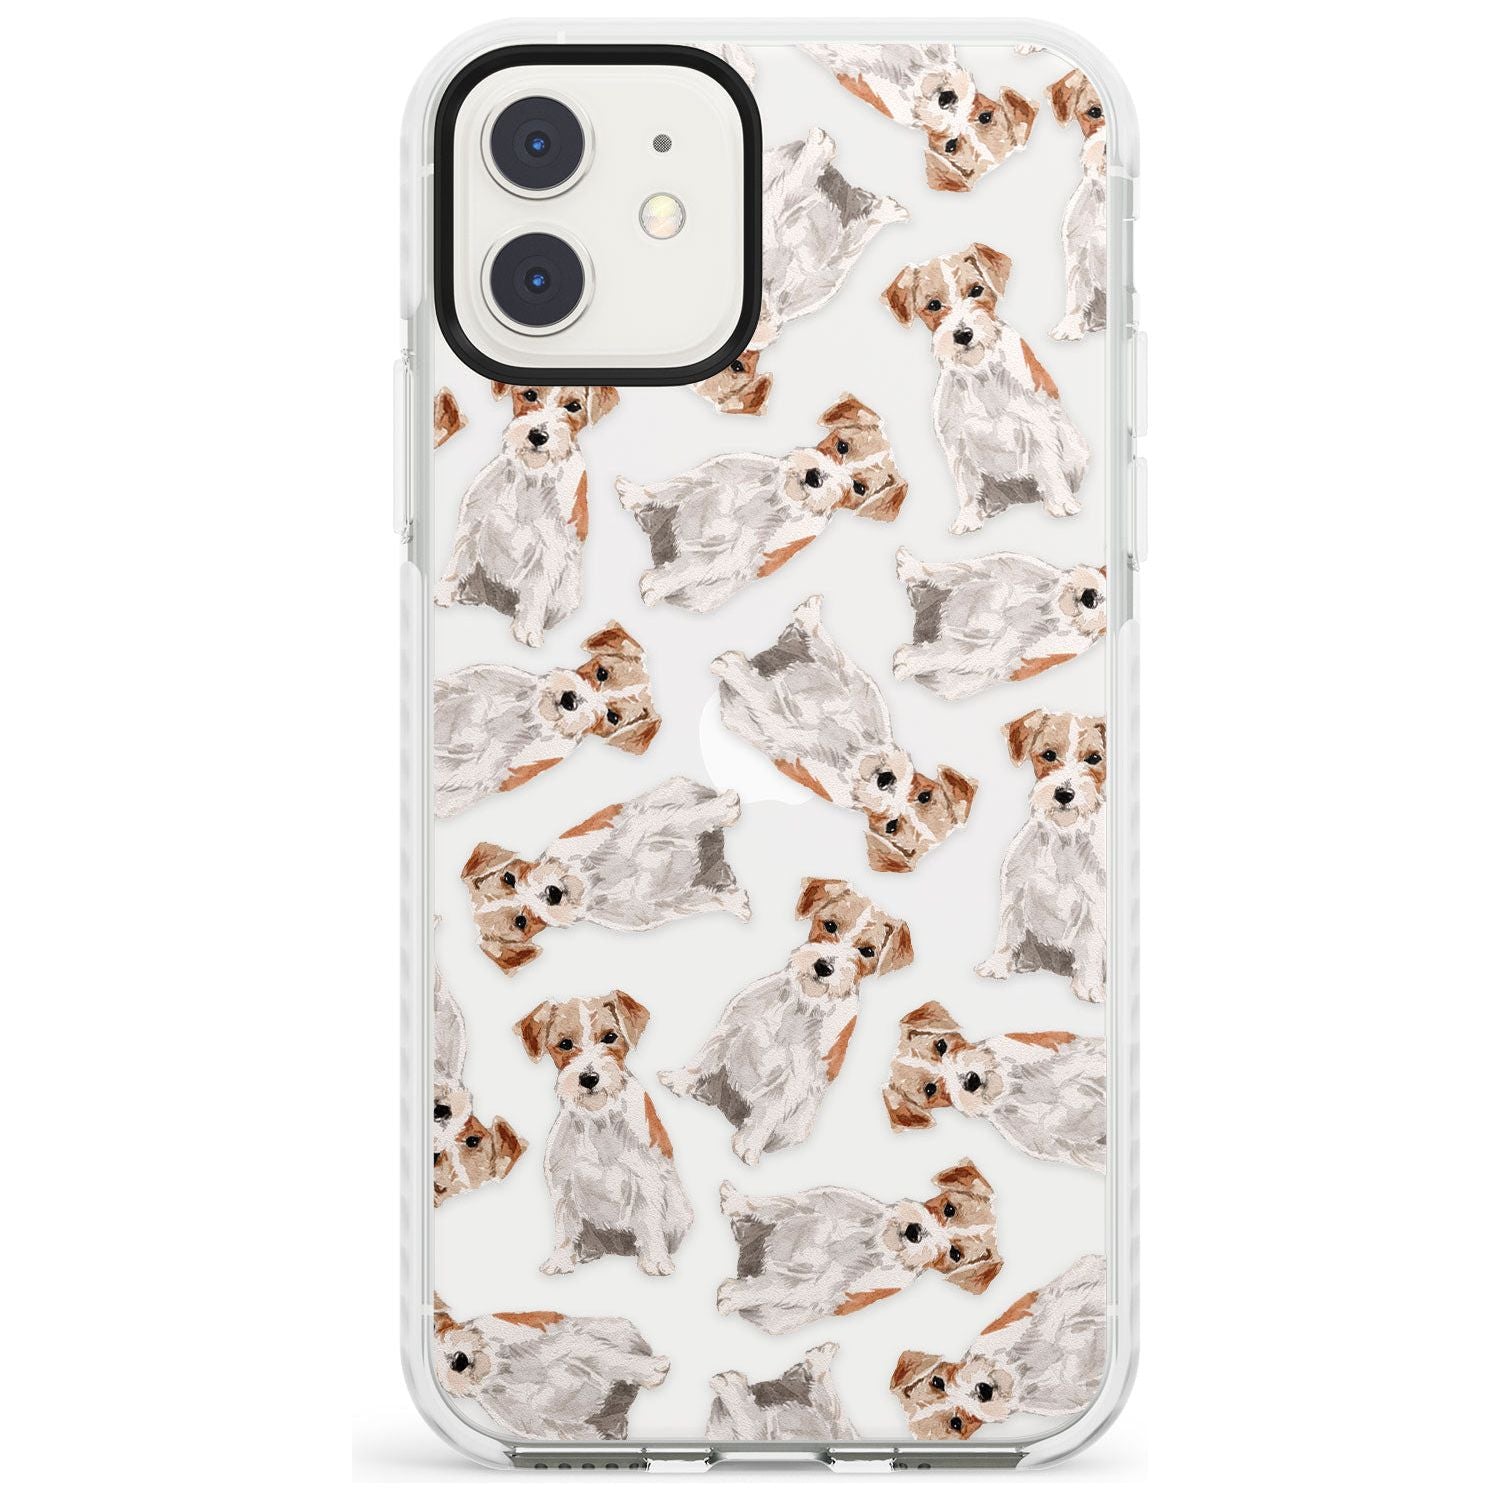 Wirehaired Jack Russell Watercolour Dog Pattern Impact Phone Case for iPhone 11